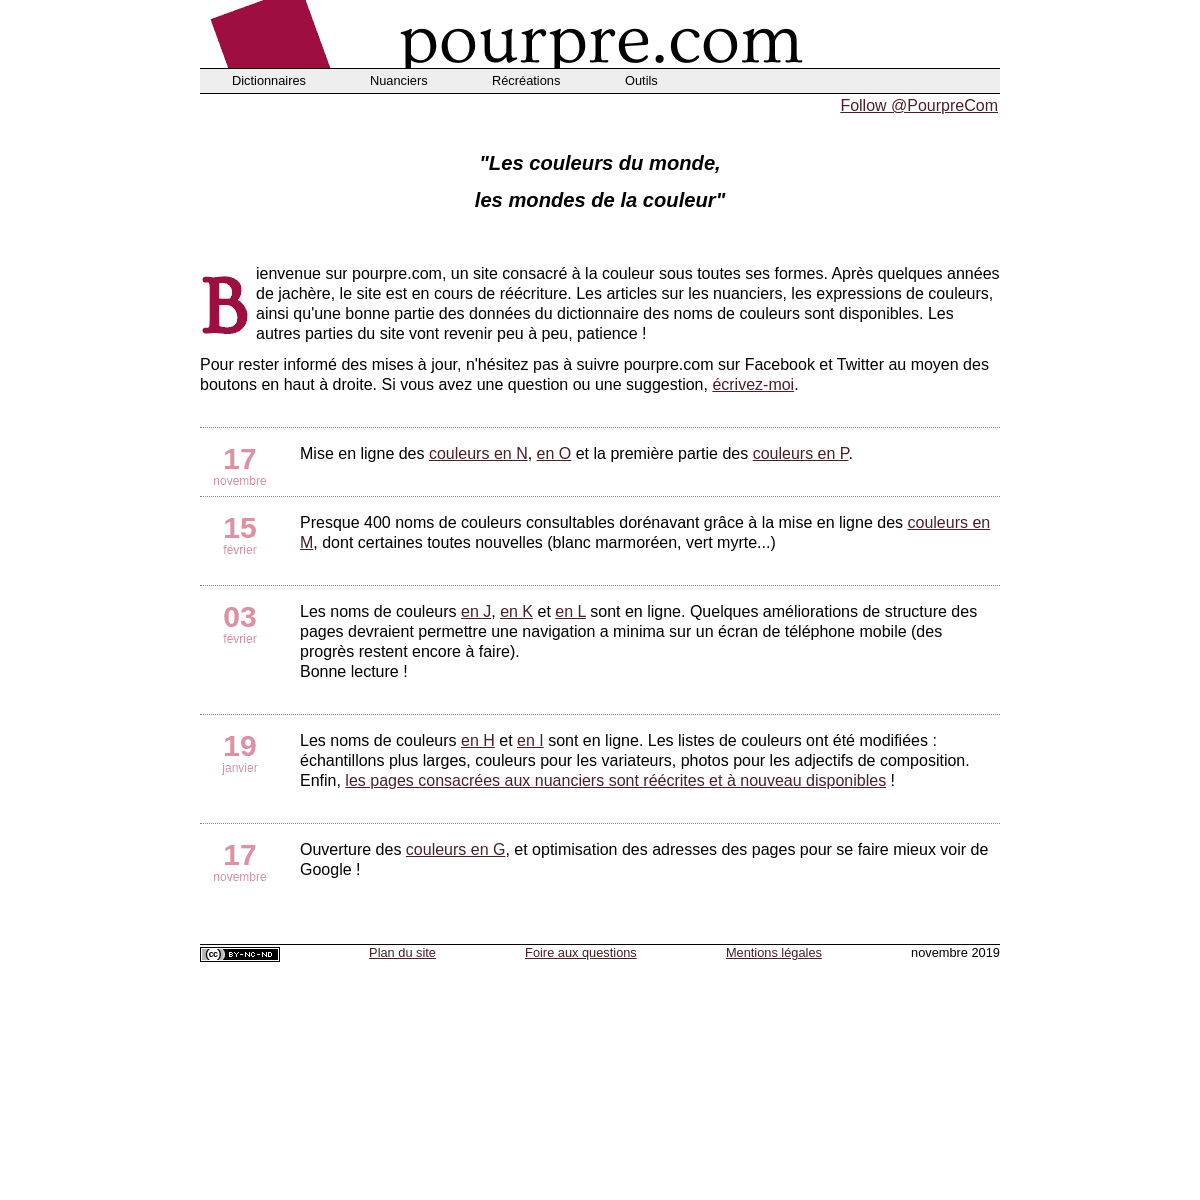 A complete backup of pourpre.com